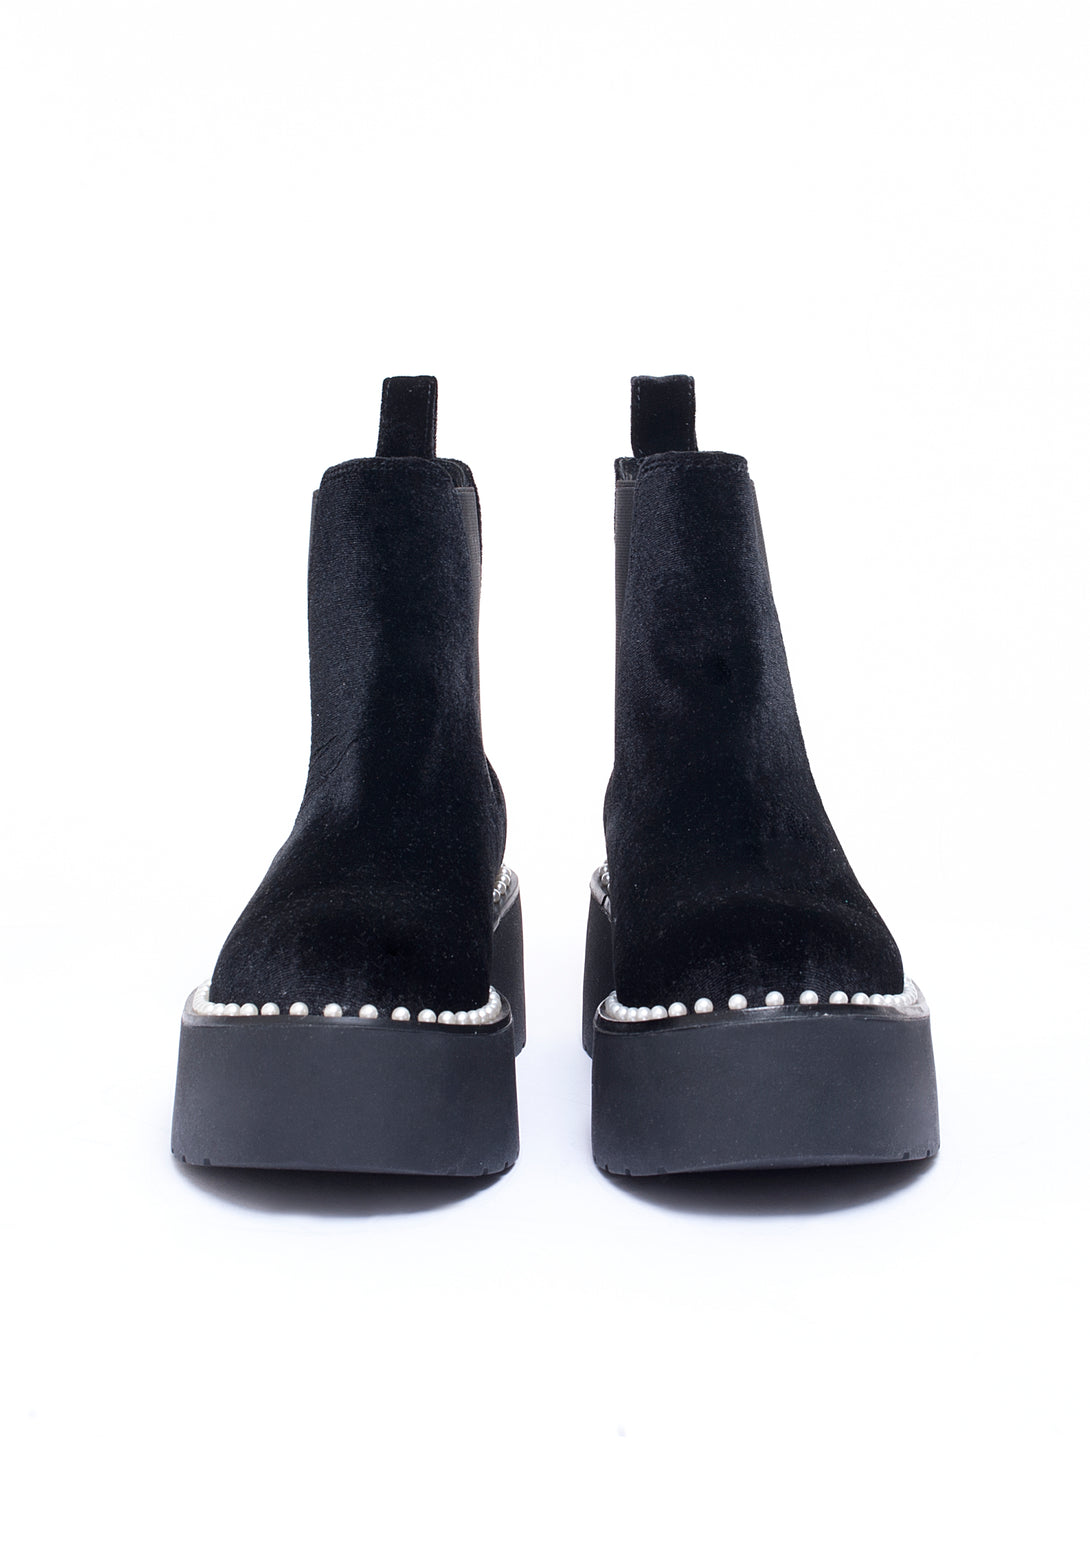 Chelsea boot made in velvet with pearls